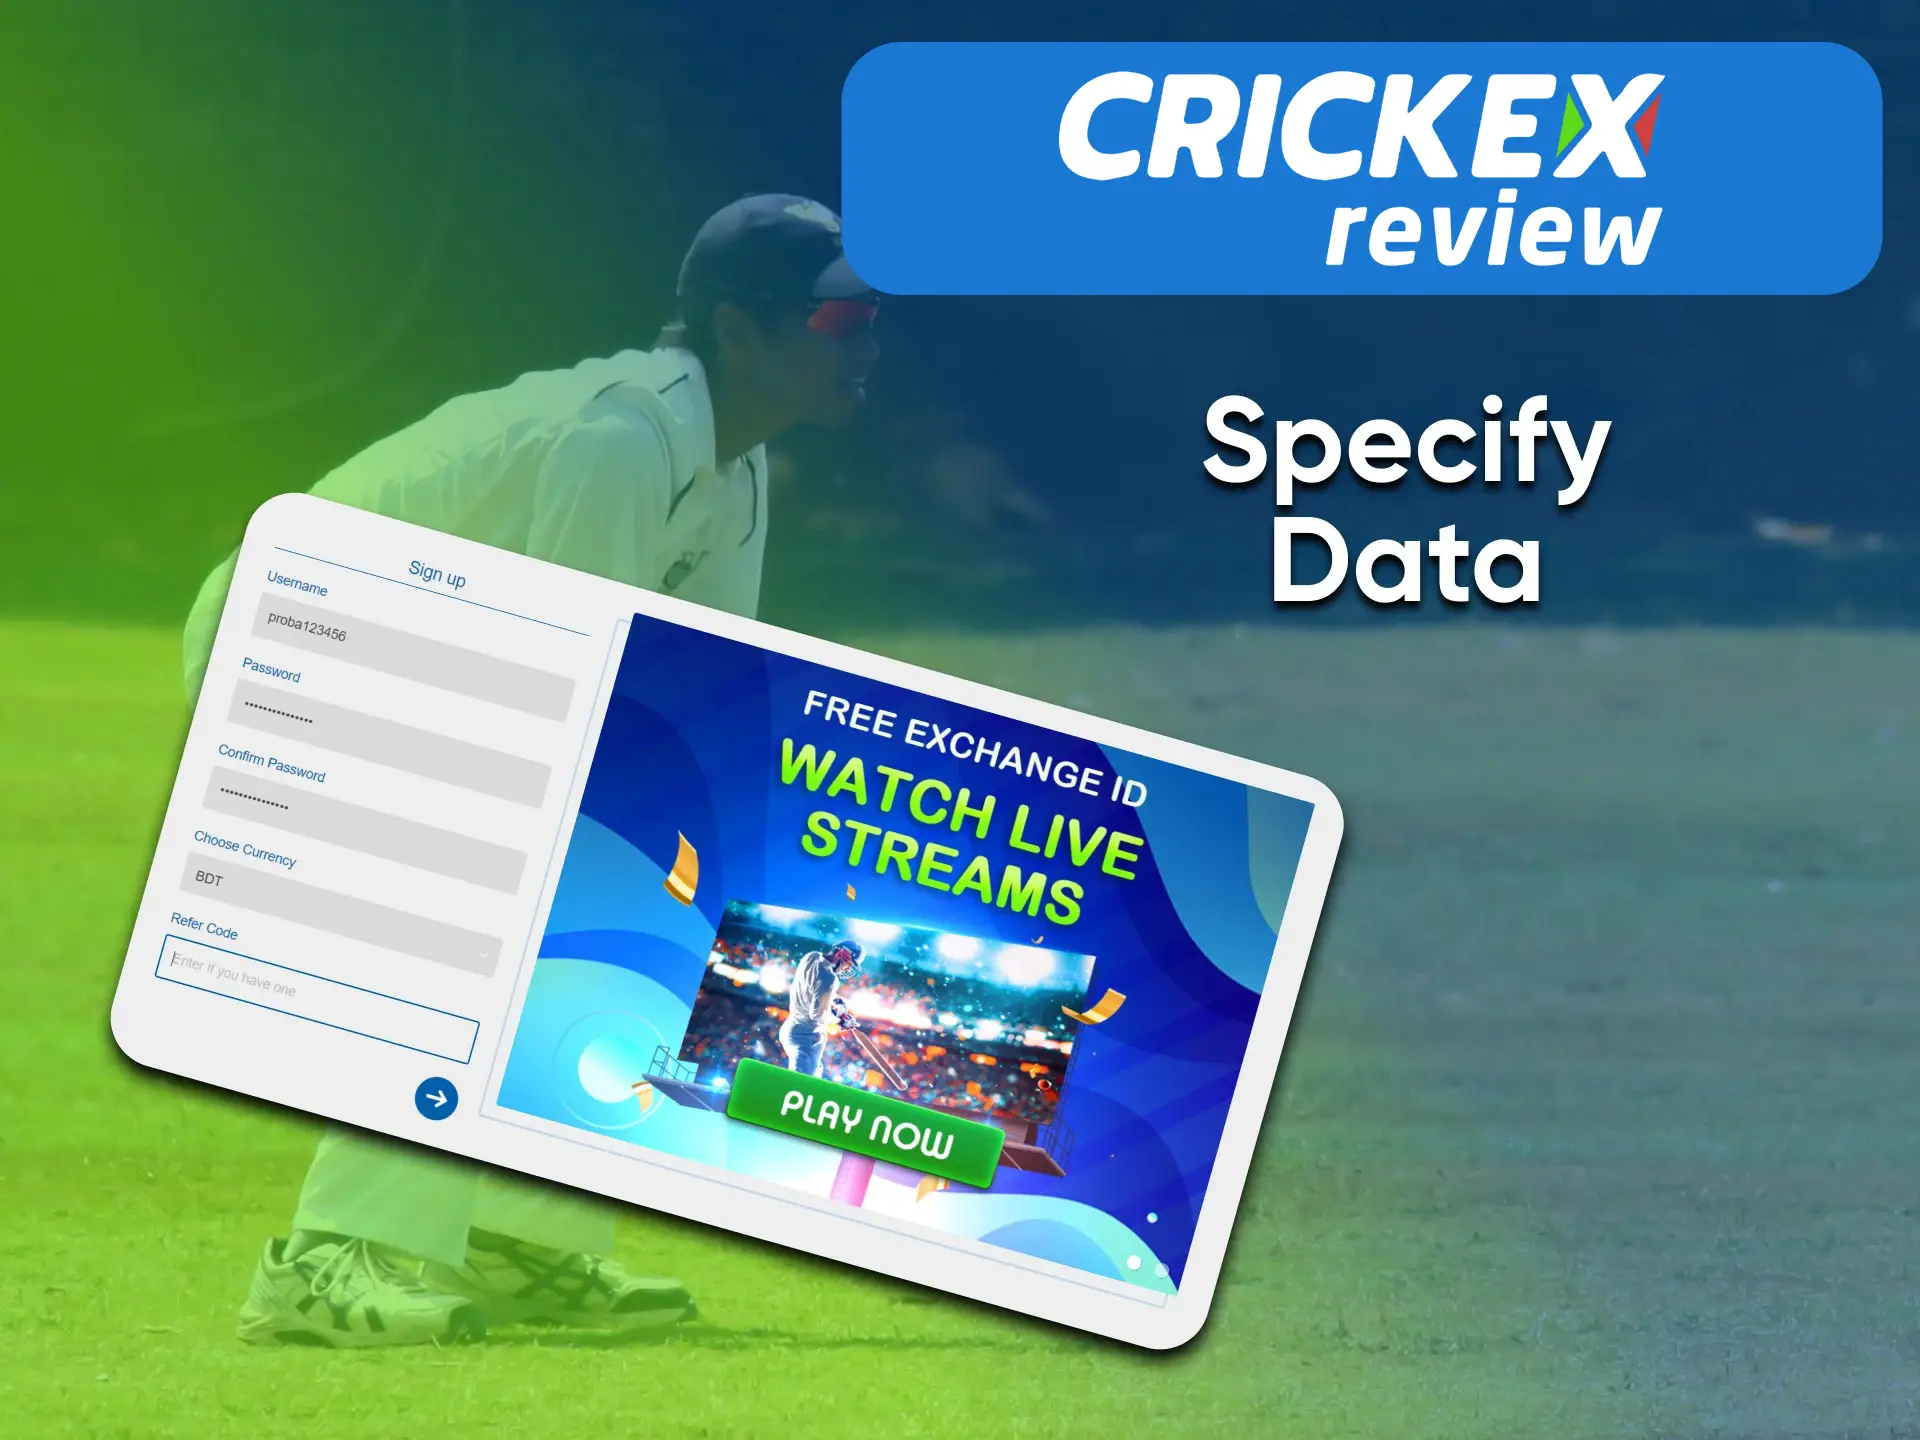 To create an account in Crickex, you need to enter data.